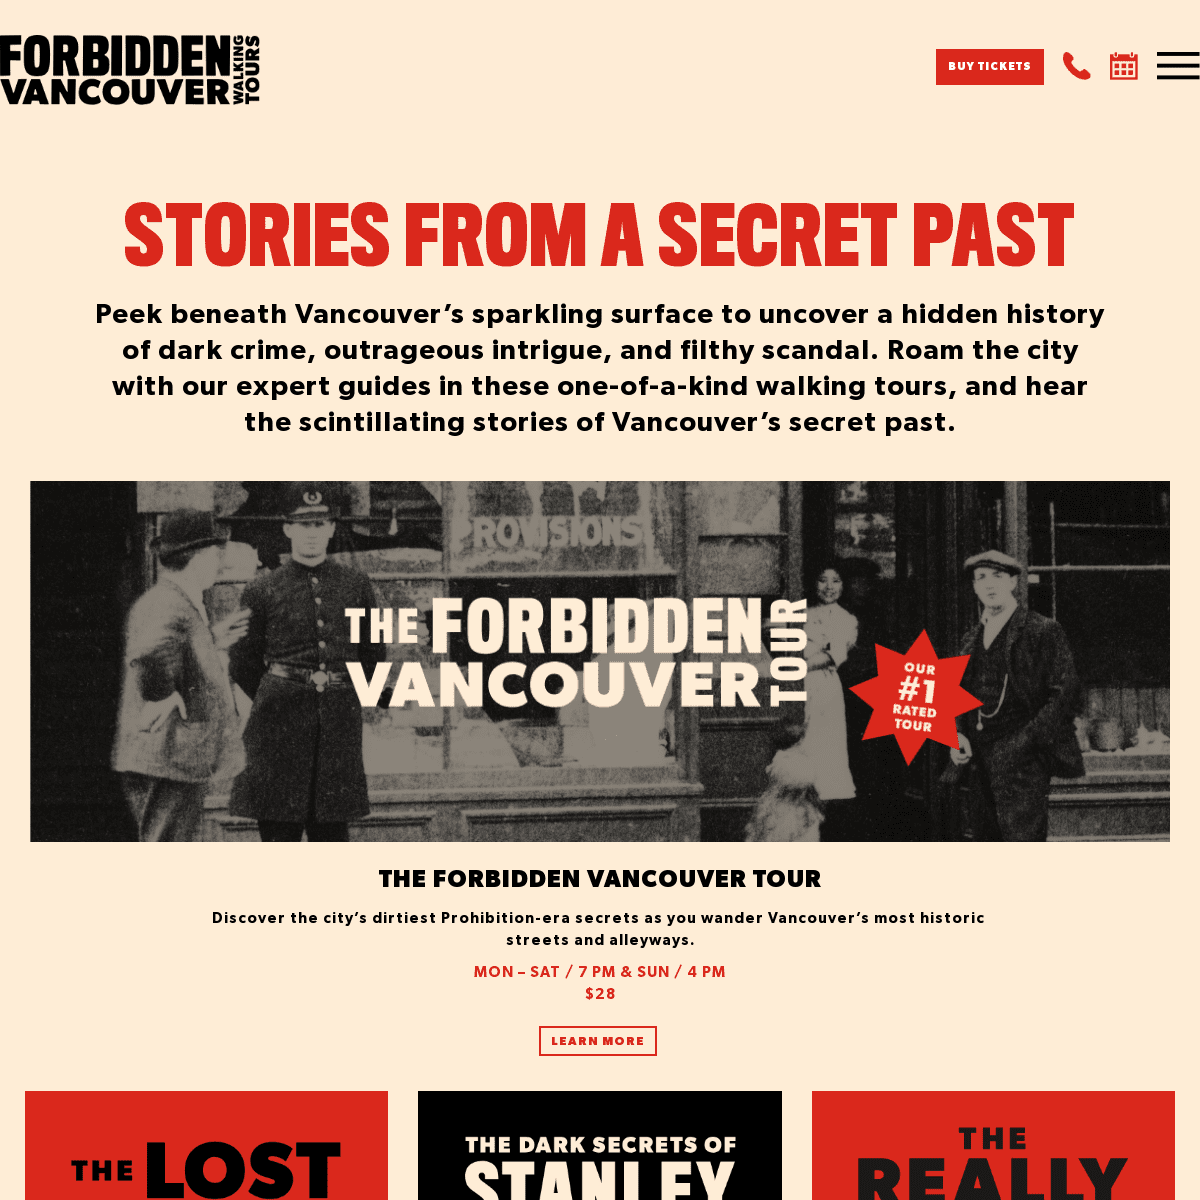   Forbidden Vancouver Walking Tours | Stories from a Secret Past